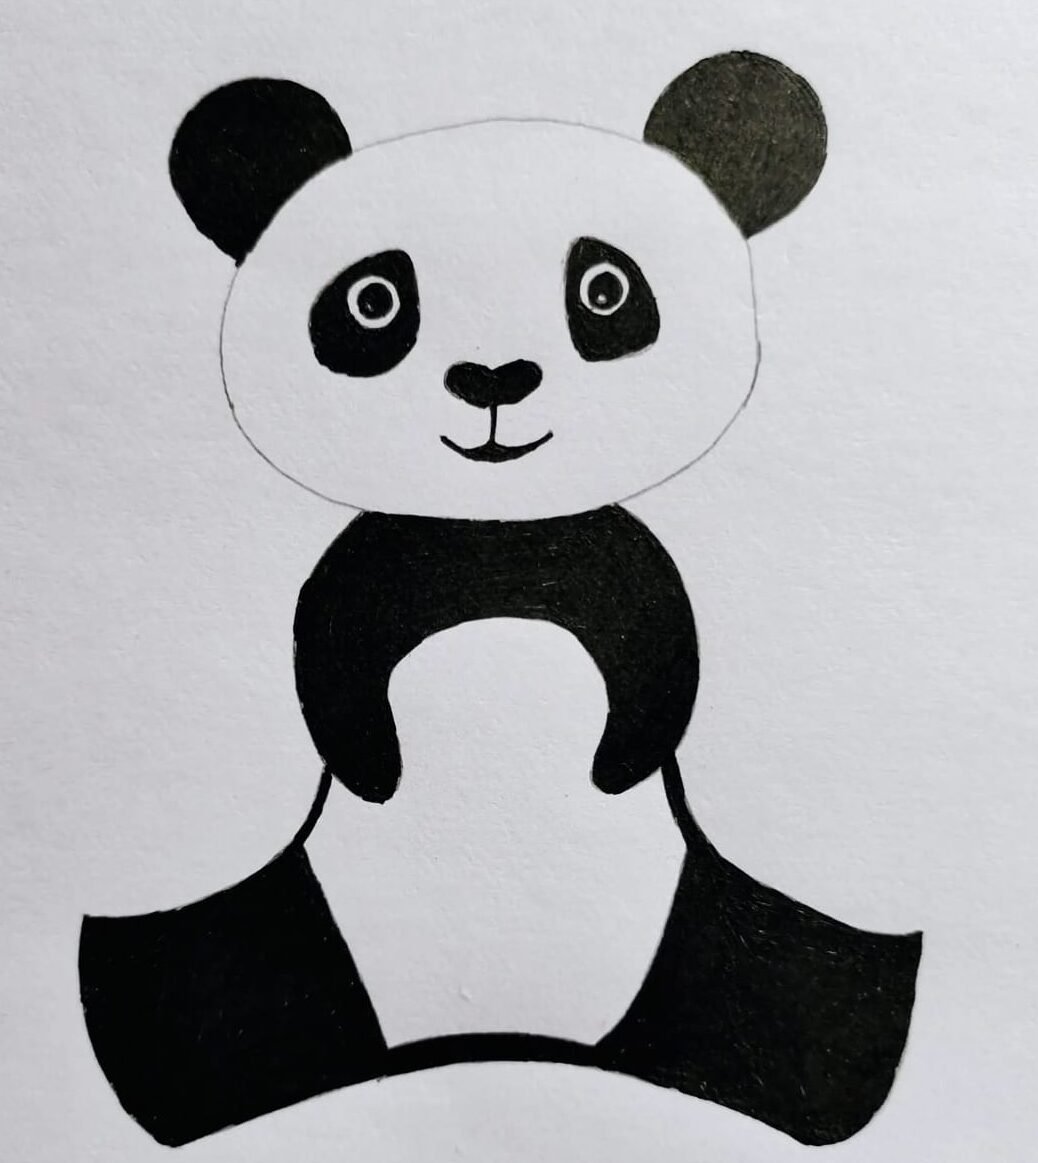 How to draw a cute simple panda - B+C Guides